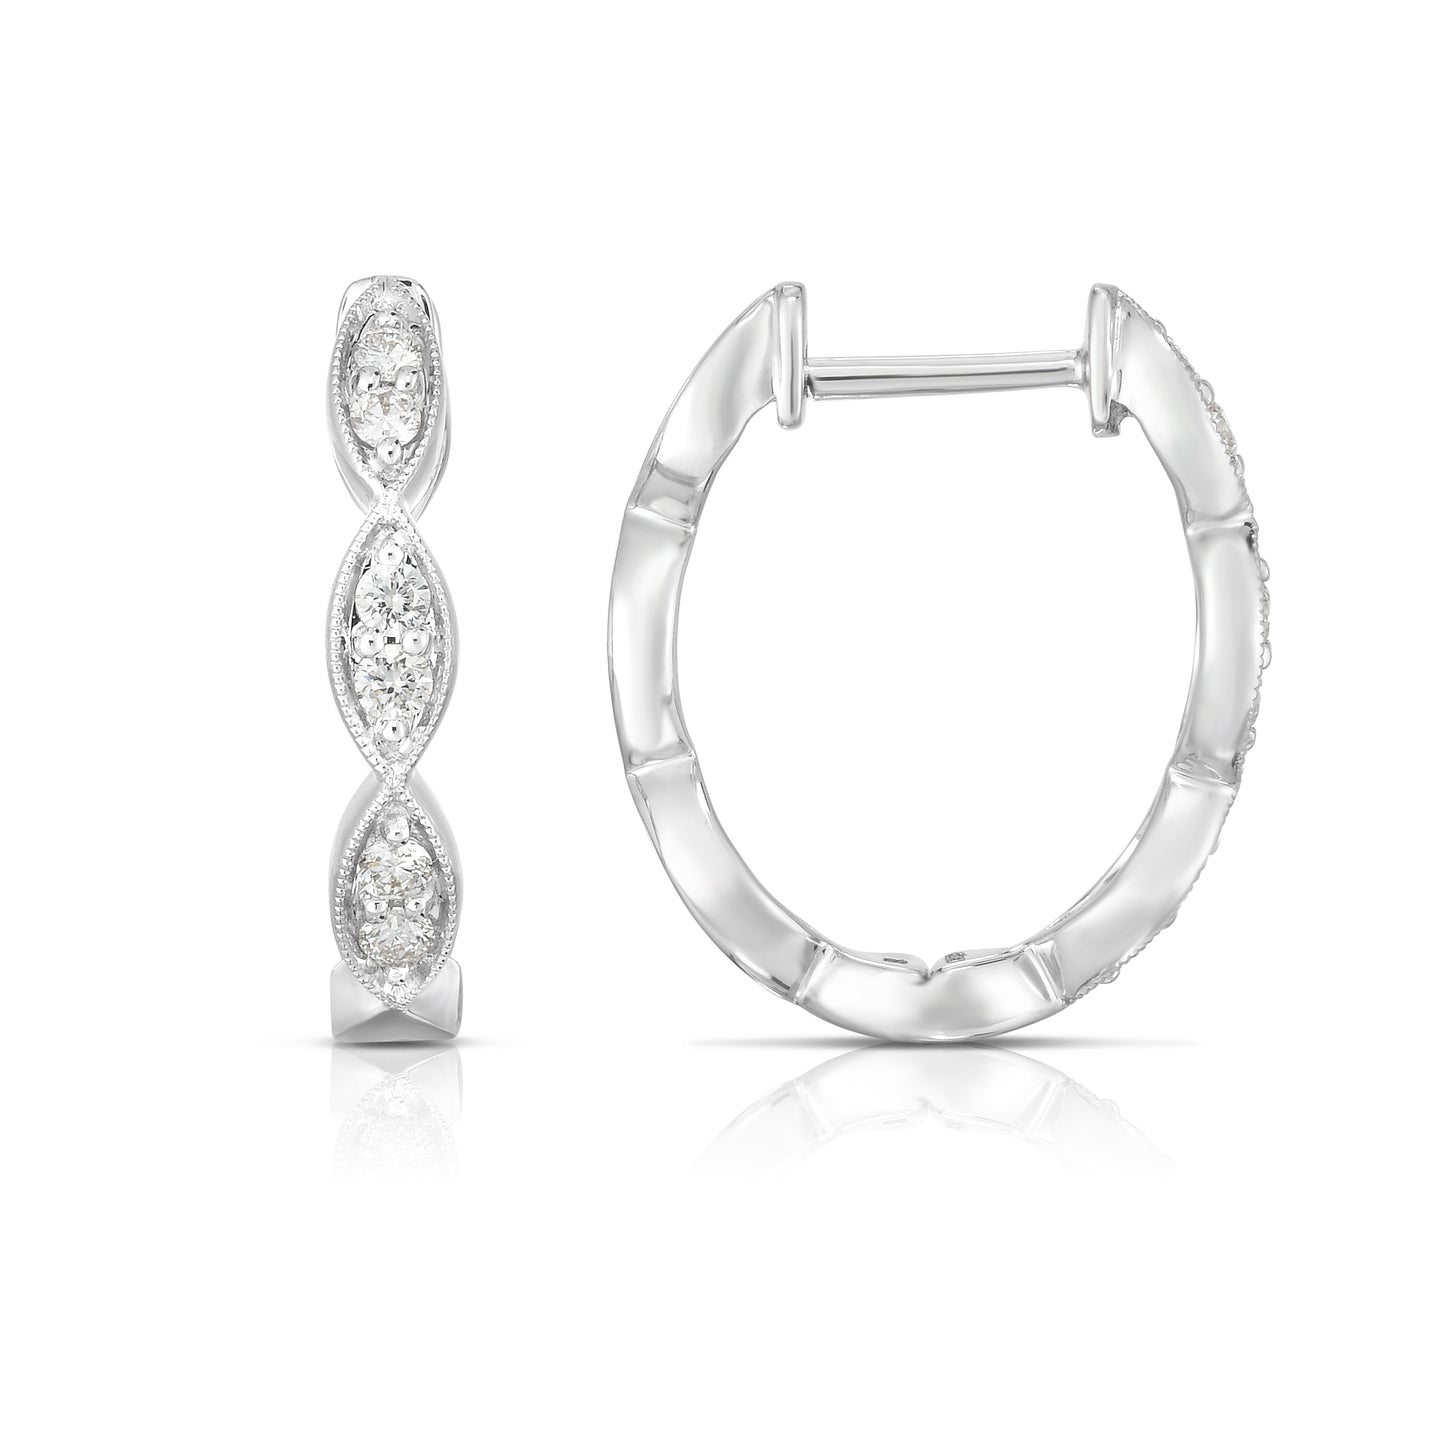 Sabel Collection 14K White Gold Diamond Hoop Earrings with Milgrain Accents